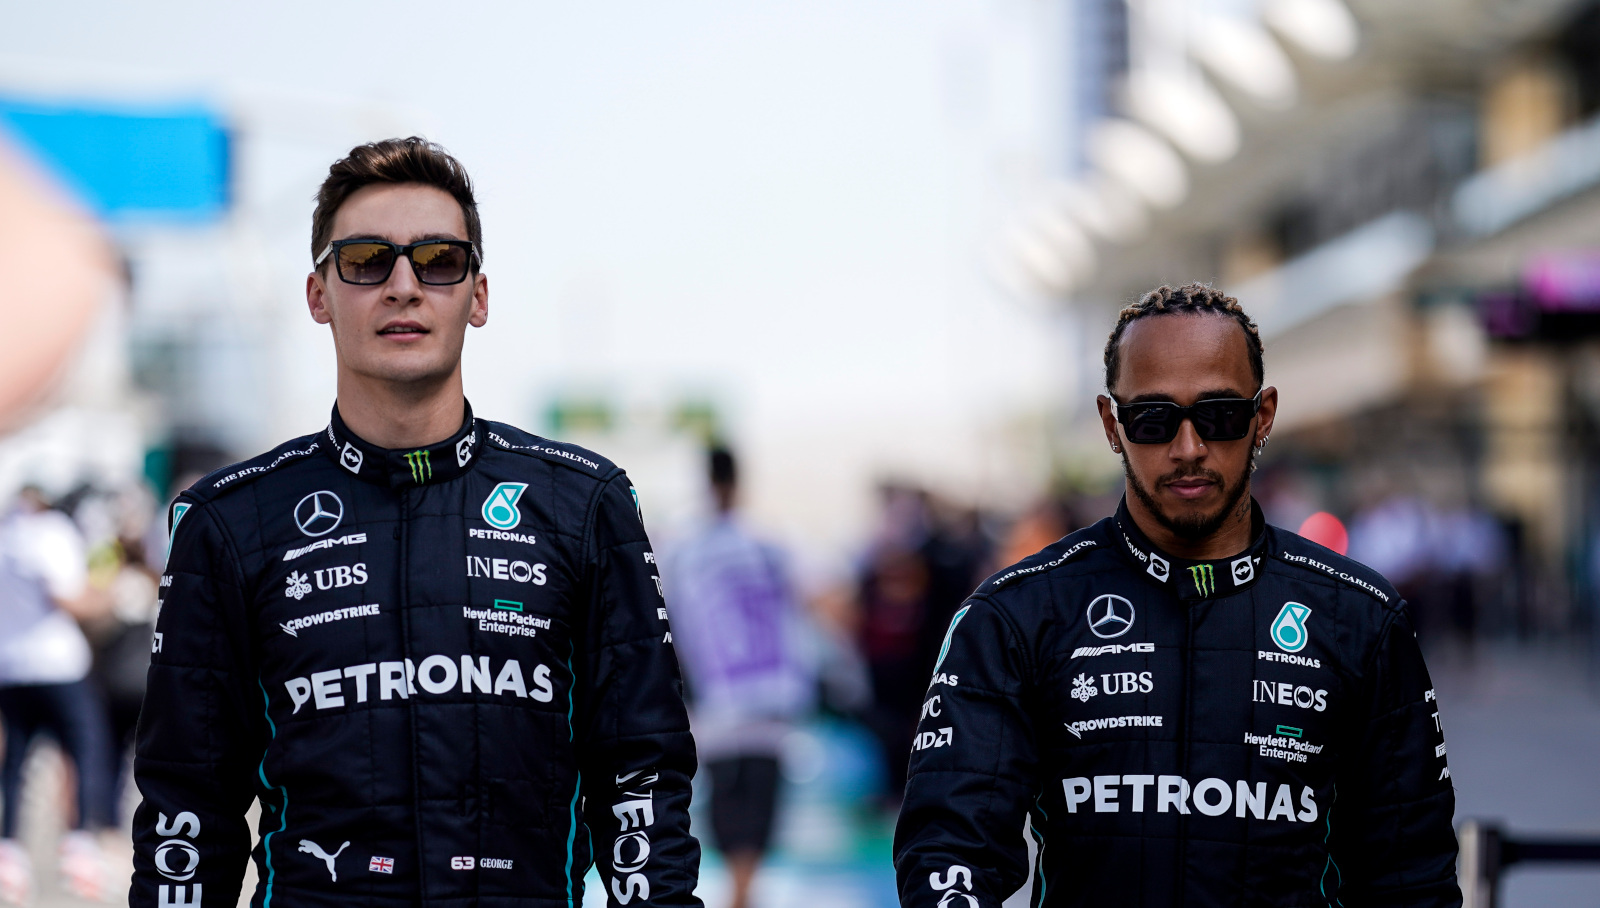 George Russell walking side by side with Lewis Hamilton. Bahrain March 2022